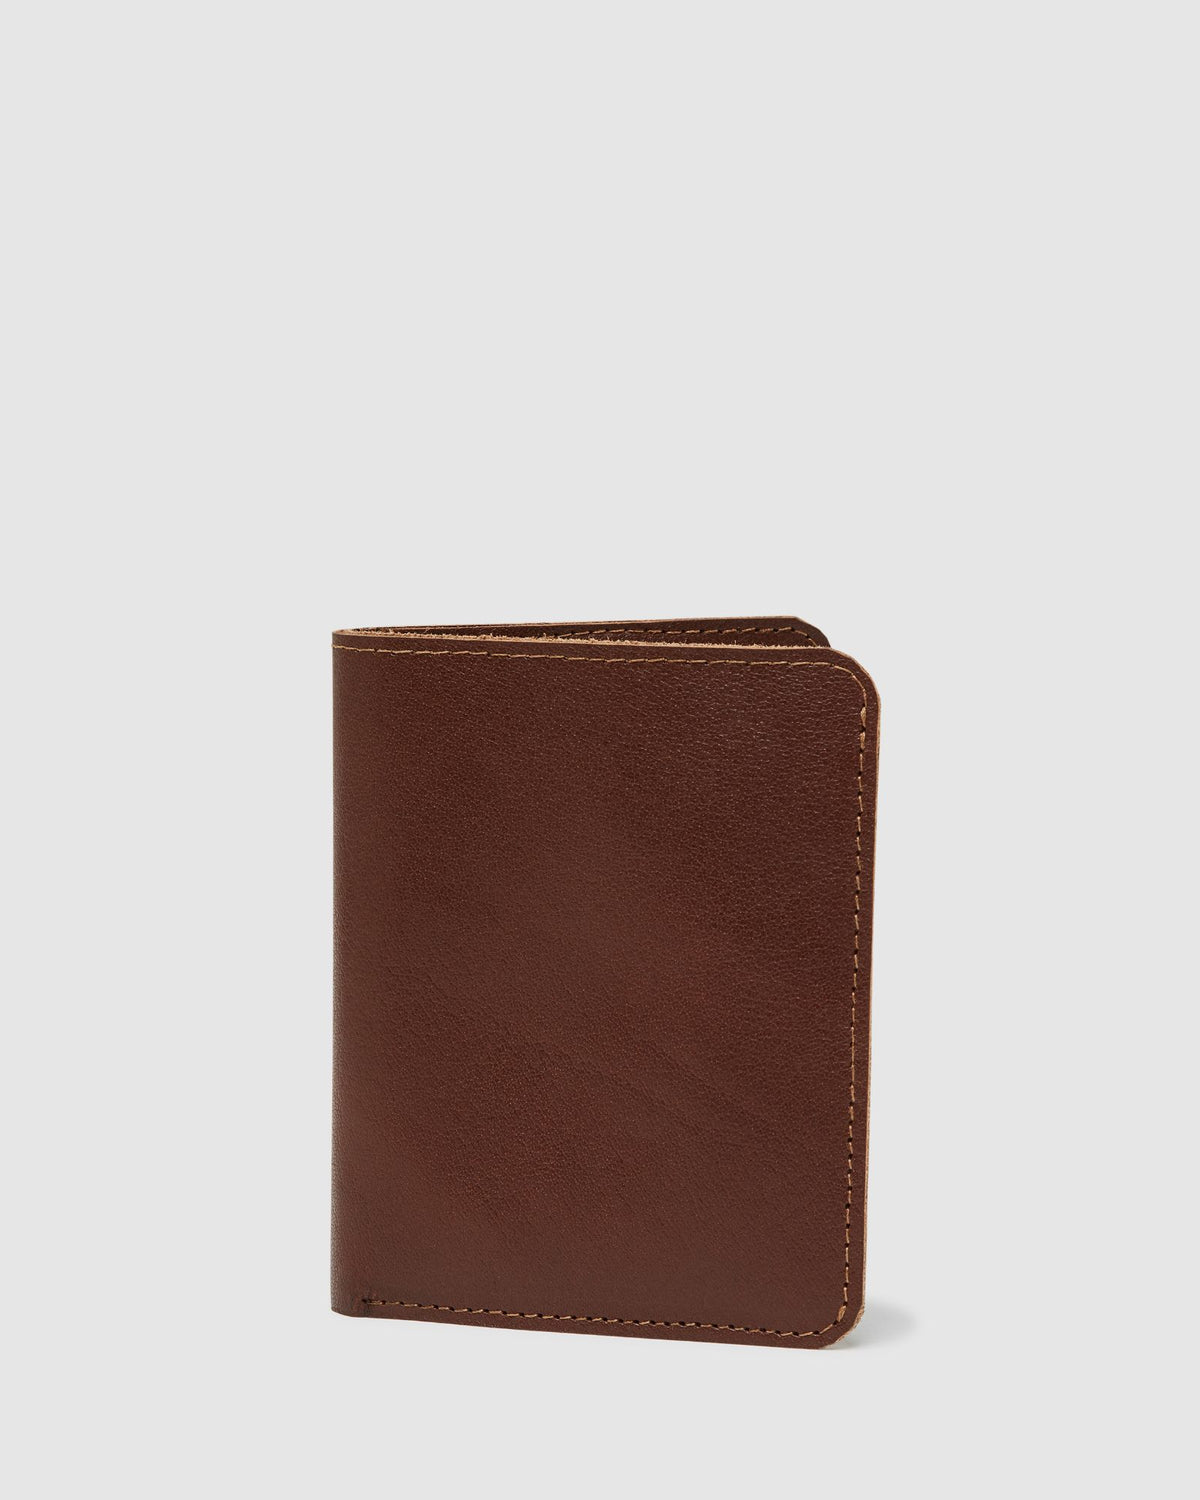 SIMMONS LEATHER WALLET MENS ACCESSORIES